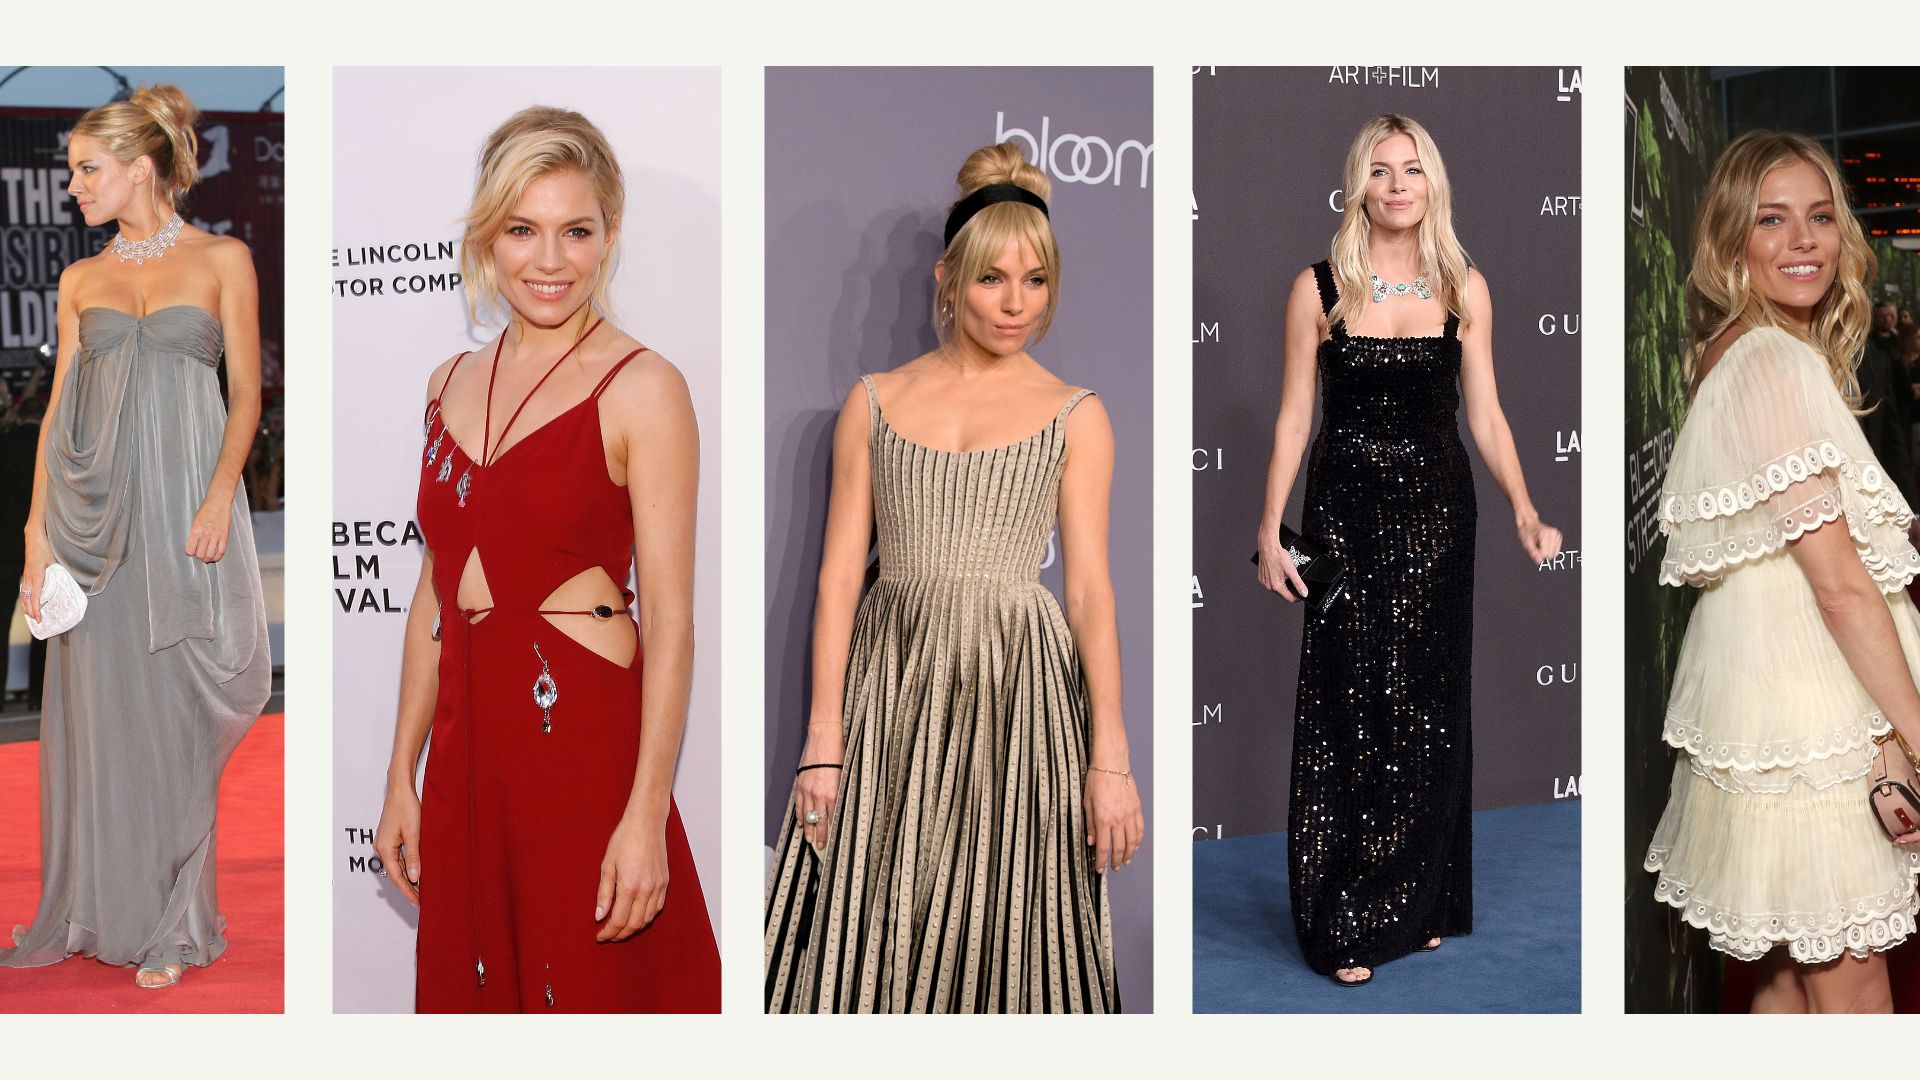 Sienna Miller Clothes and Outfits, Page 8